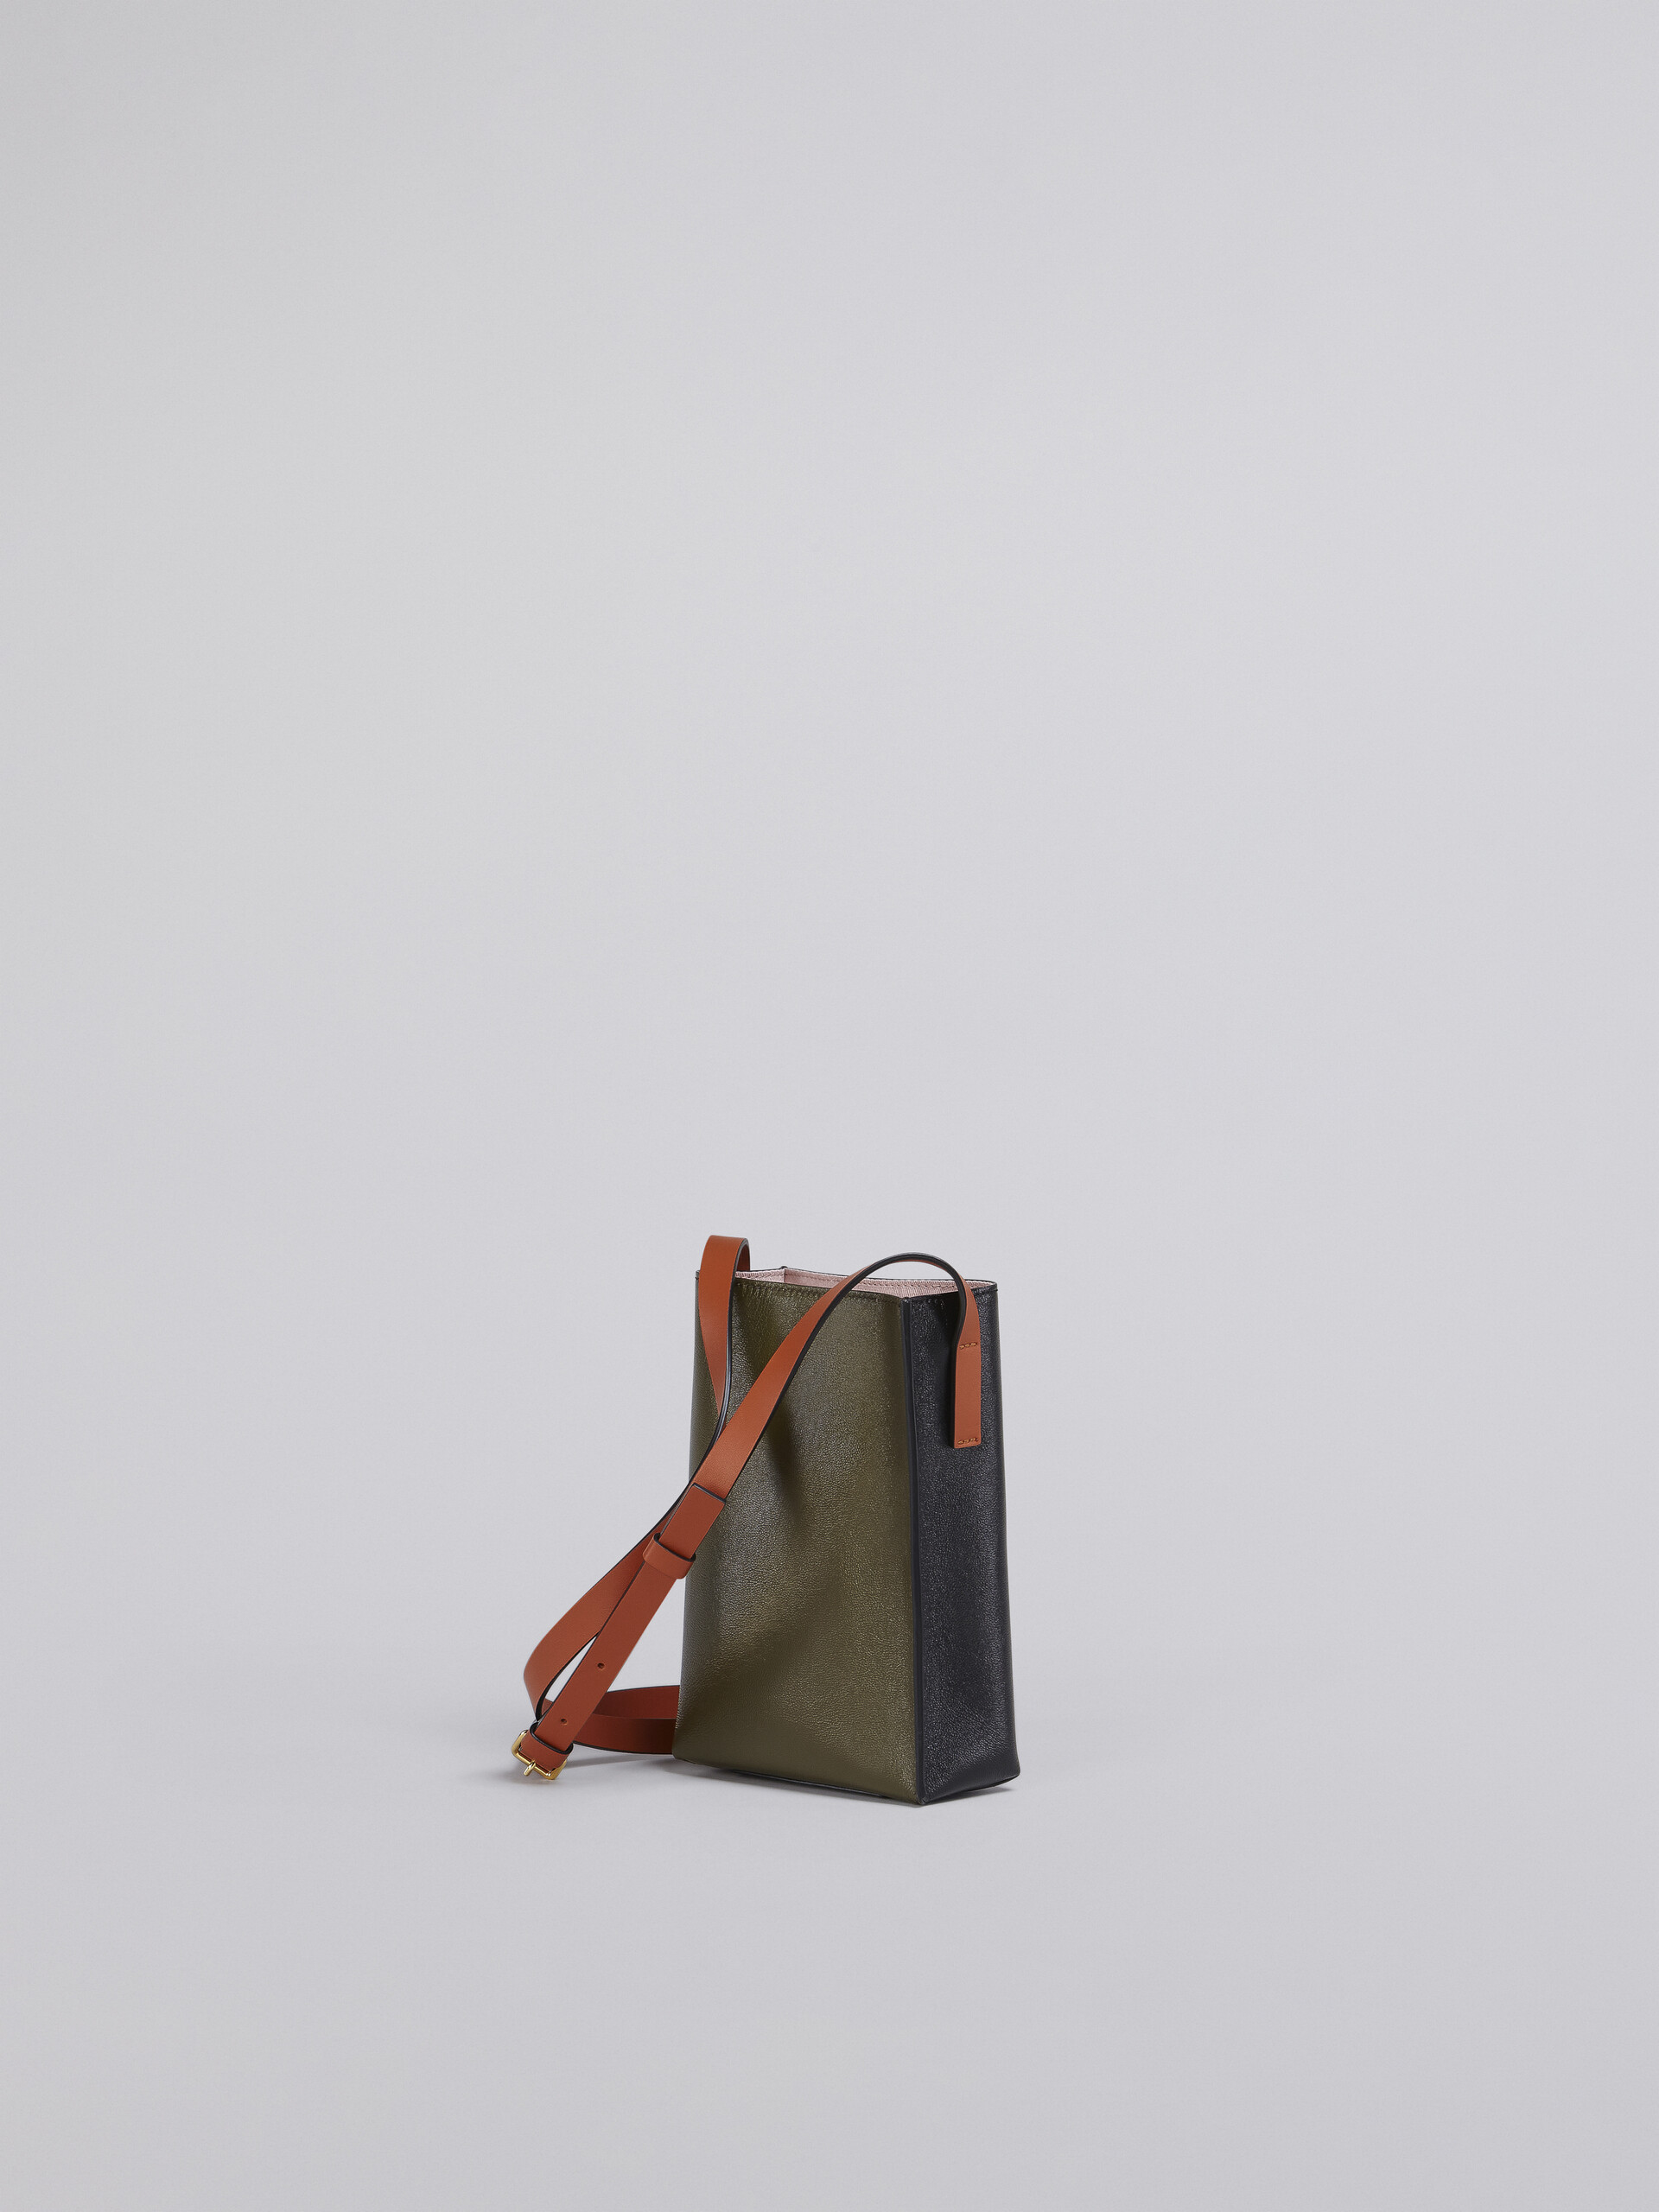 MUSEO SOFT nano bag in black and green leather - Shoulder Bags - Image 3